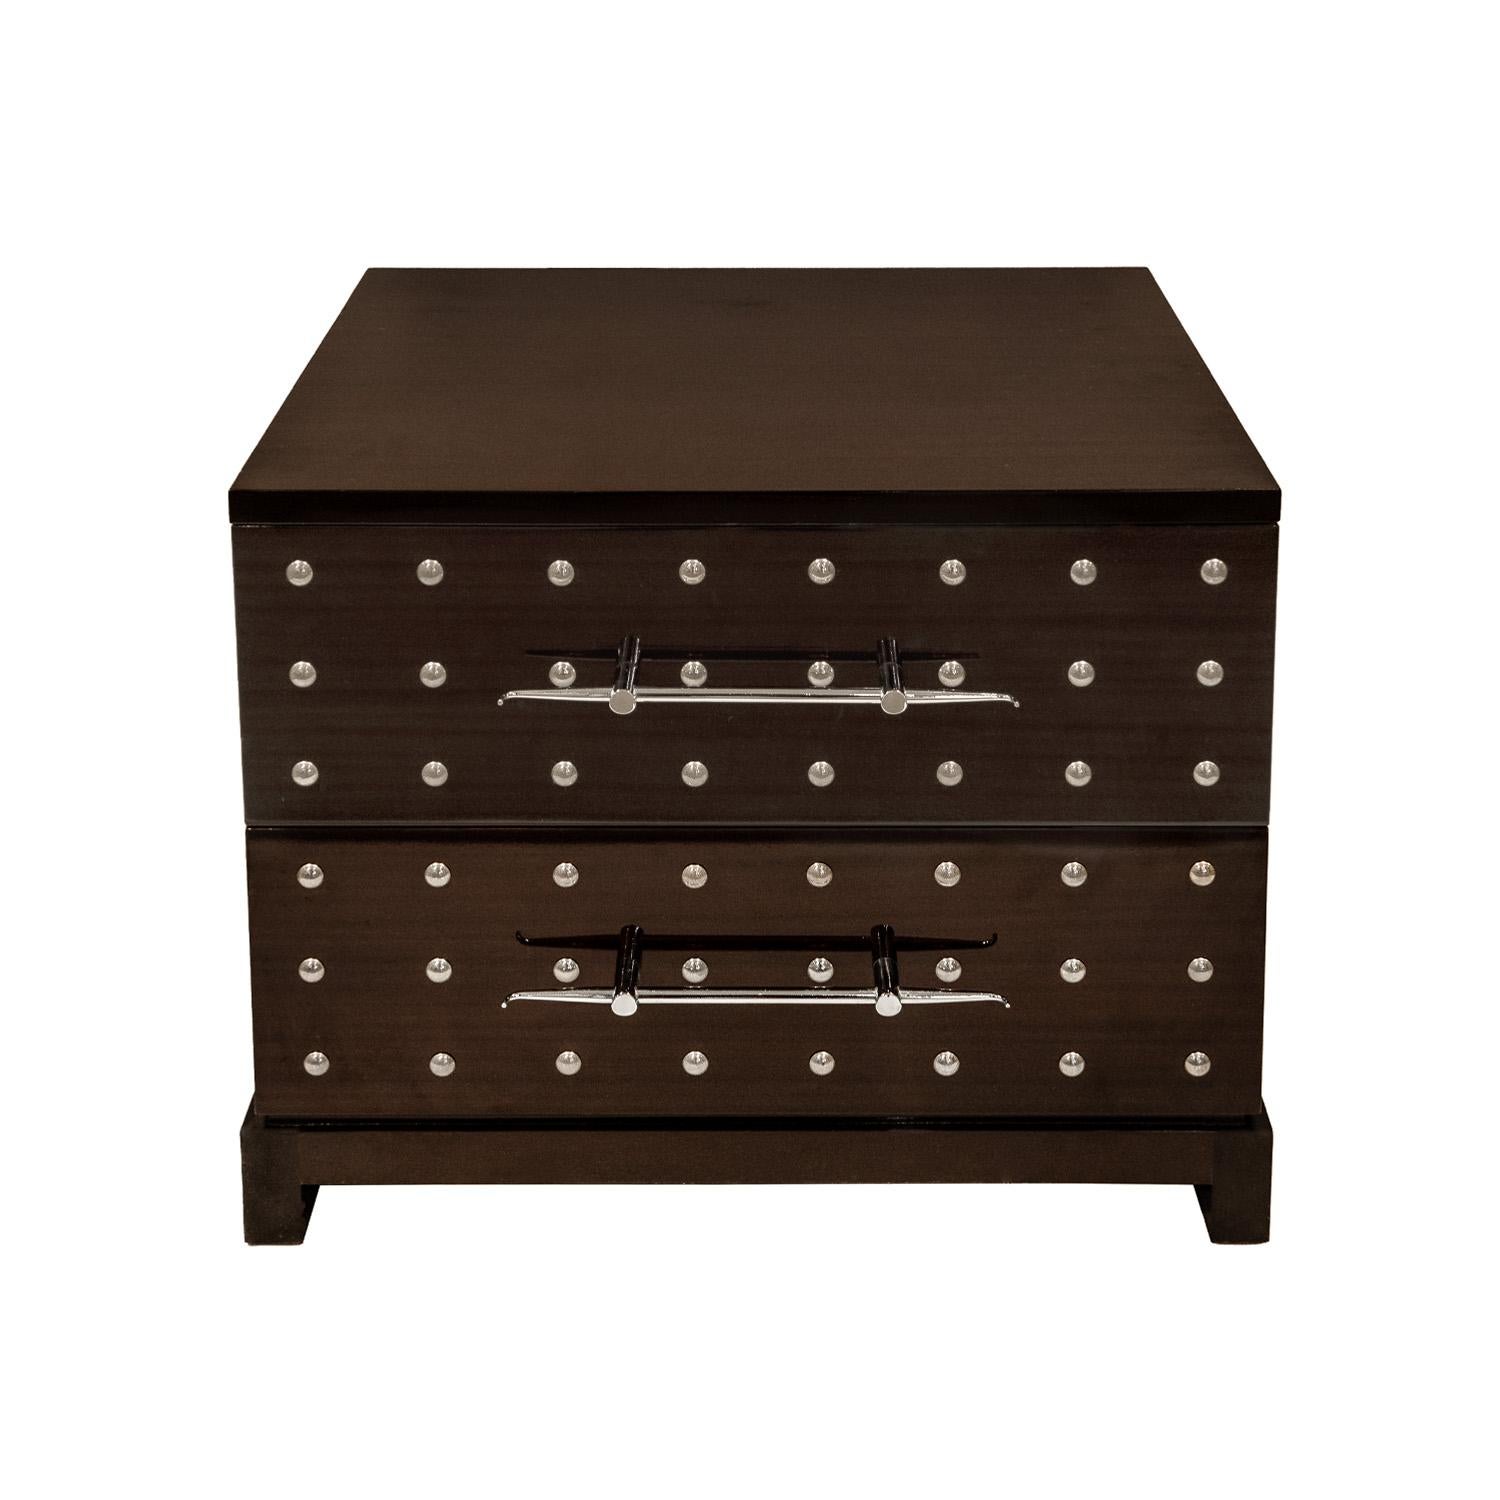 Small cabinet/chest/bedside table model 223S with 2 drawers in mahogany with chrome studs and exquisite pulls by Tommi Parzinger for Parzinger Originals, American 1981.  This piece is a gem.  Beautifully crafted, it exudes Parzinger